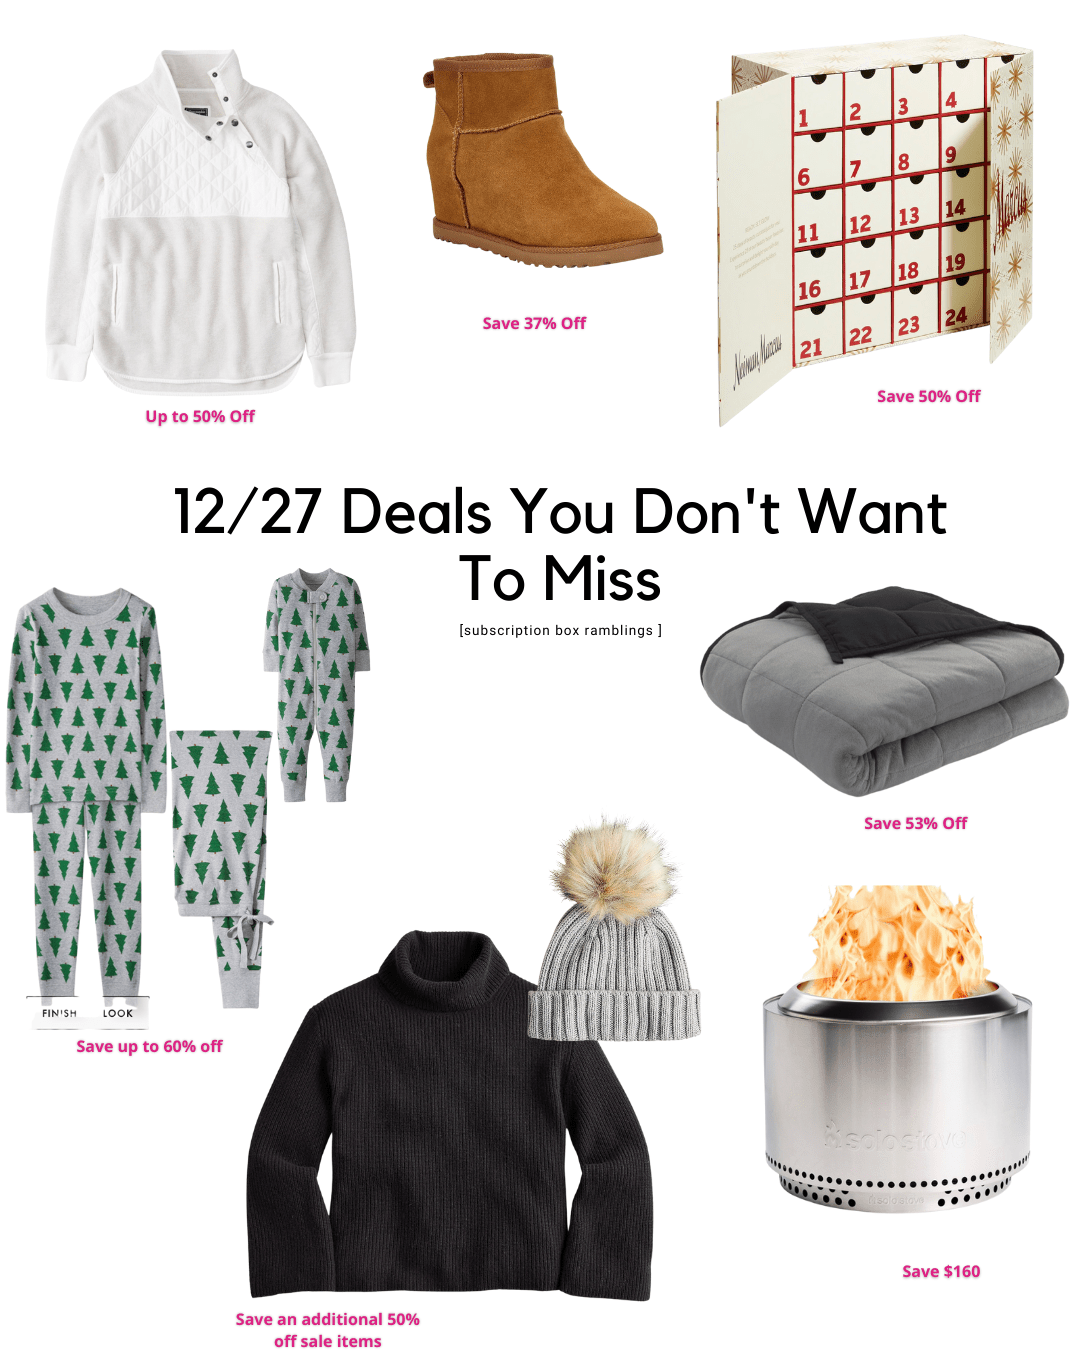 Deals You Don’t Want to Miss – 12/27